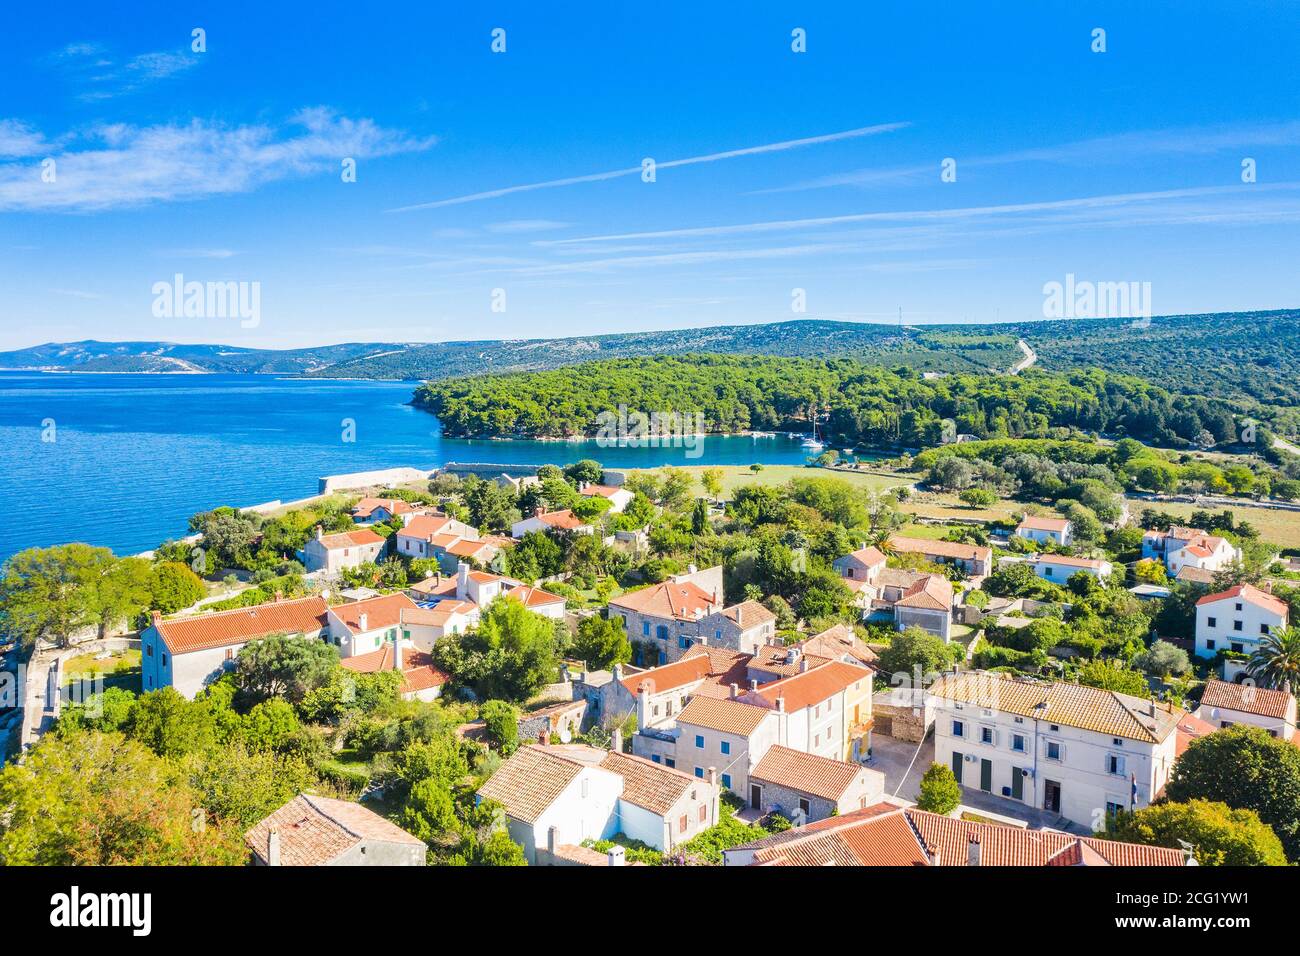 Panoramic view of touristic town of Osor between islands Cres and Losinj, Croatia Stock Photo